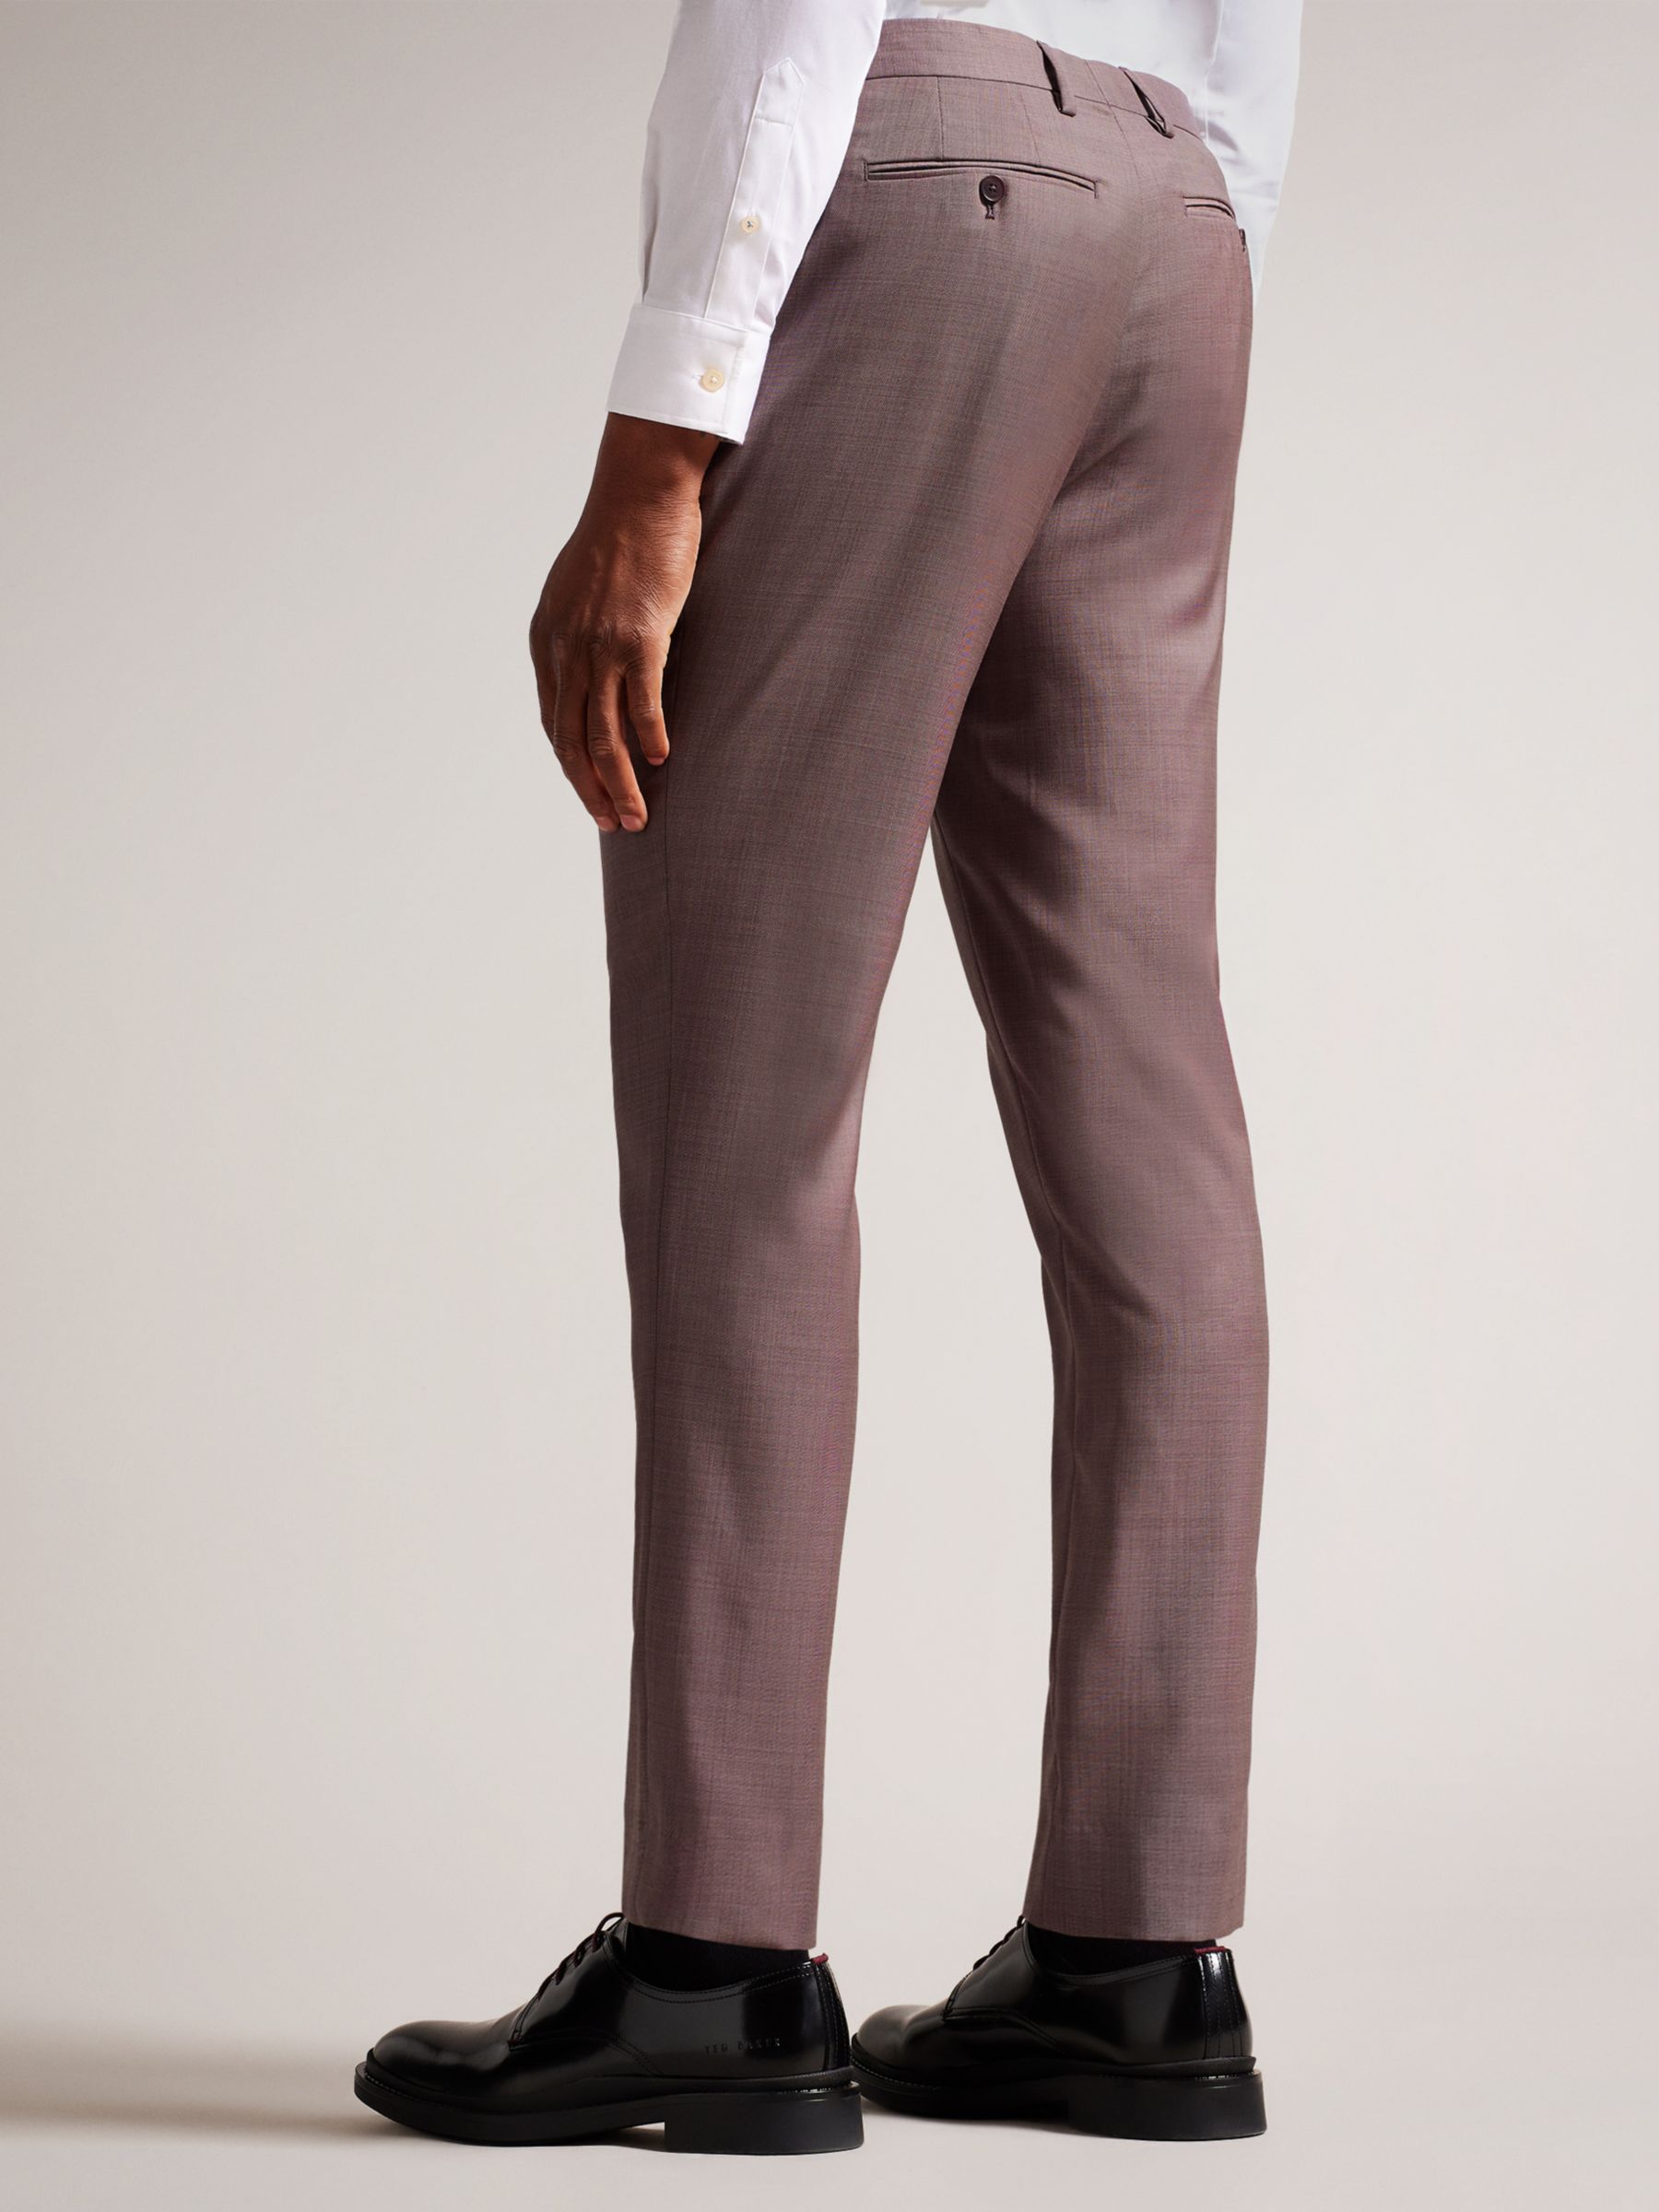 Buy Ted Baker Bryon Slim Fit Trousers Online at johnlewis.com